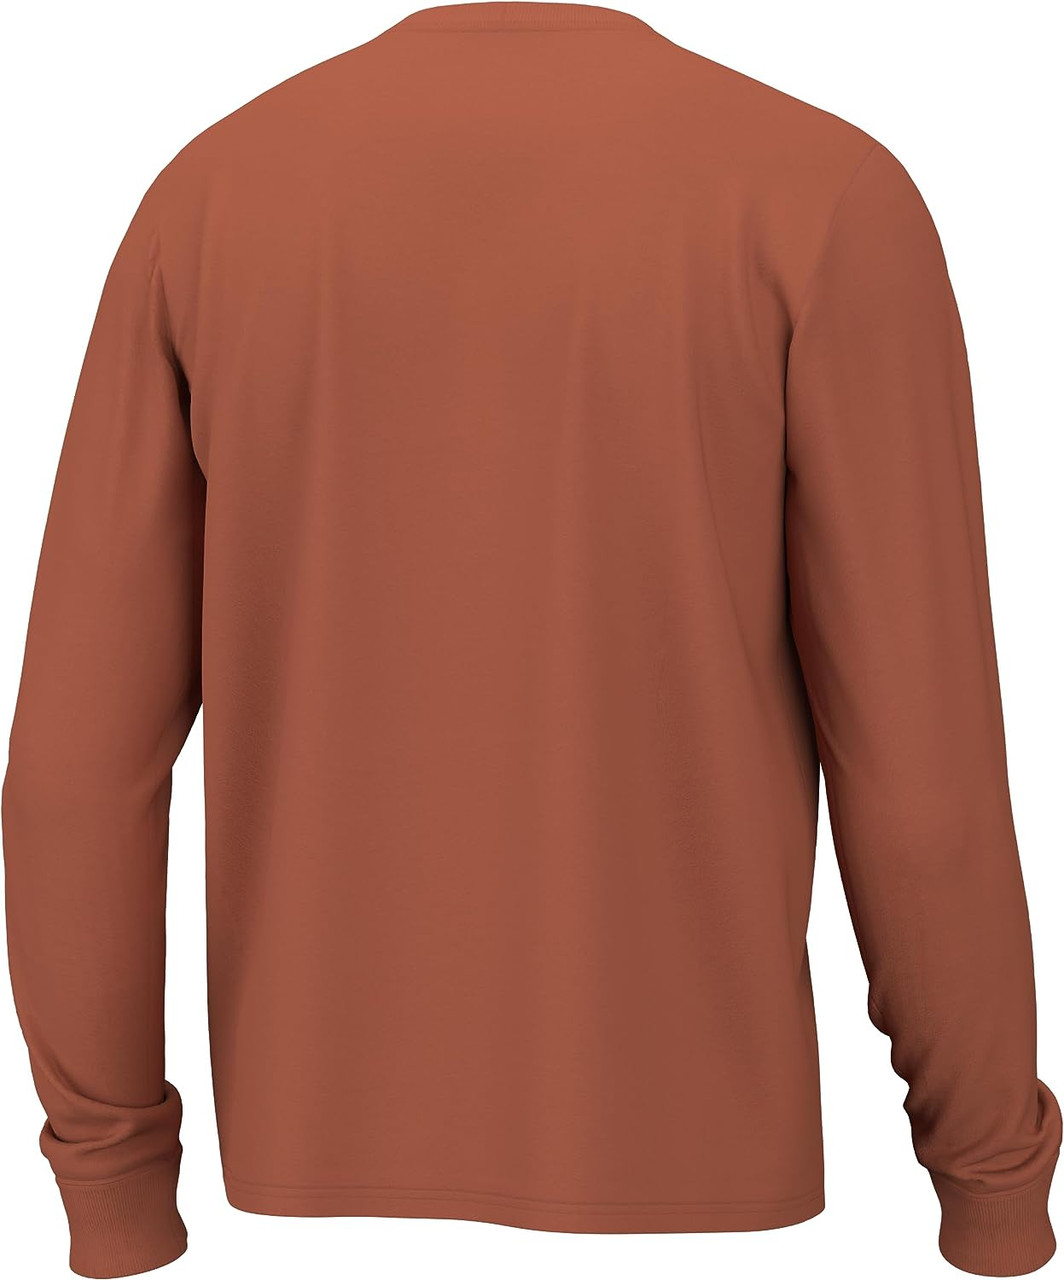 HUK Men's Standard Long Sleeve U Patch Pocket Tee - Baked Clay - 3X-Large